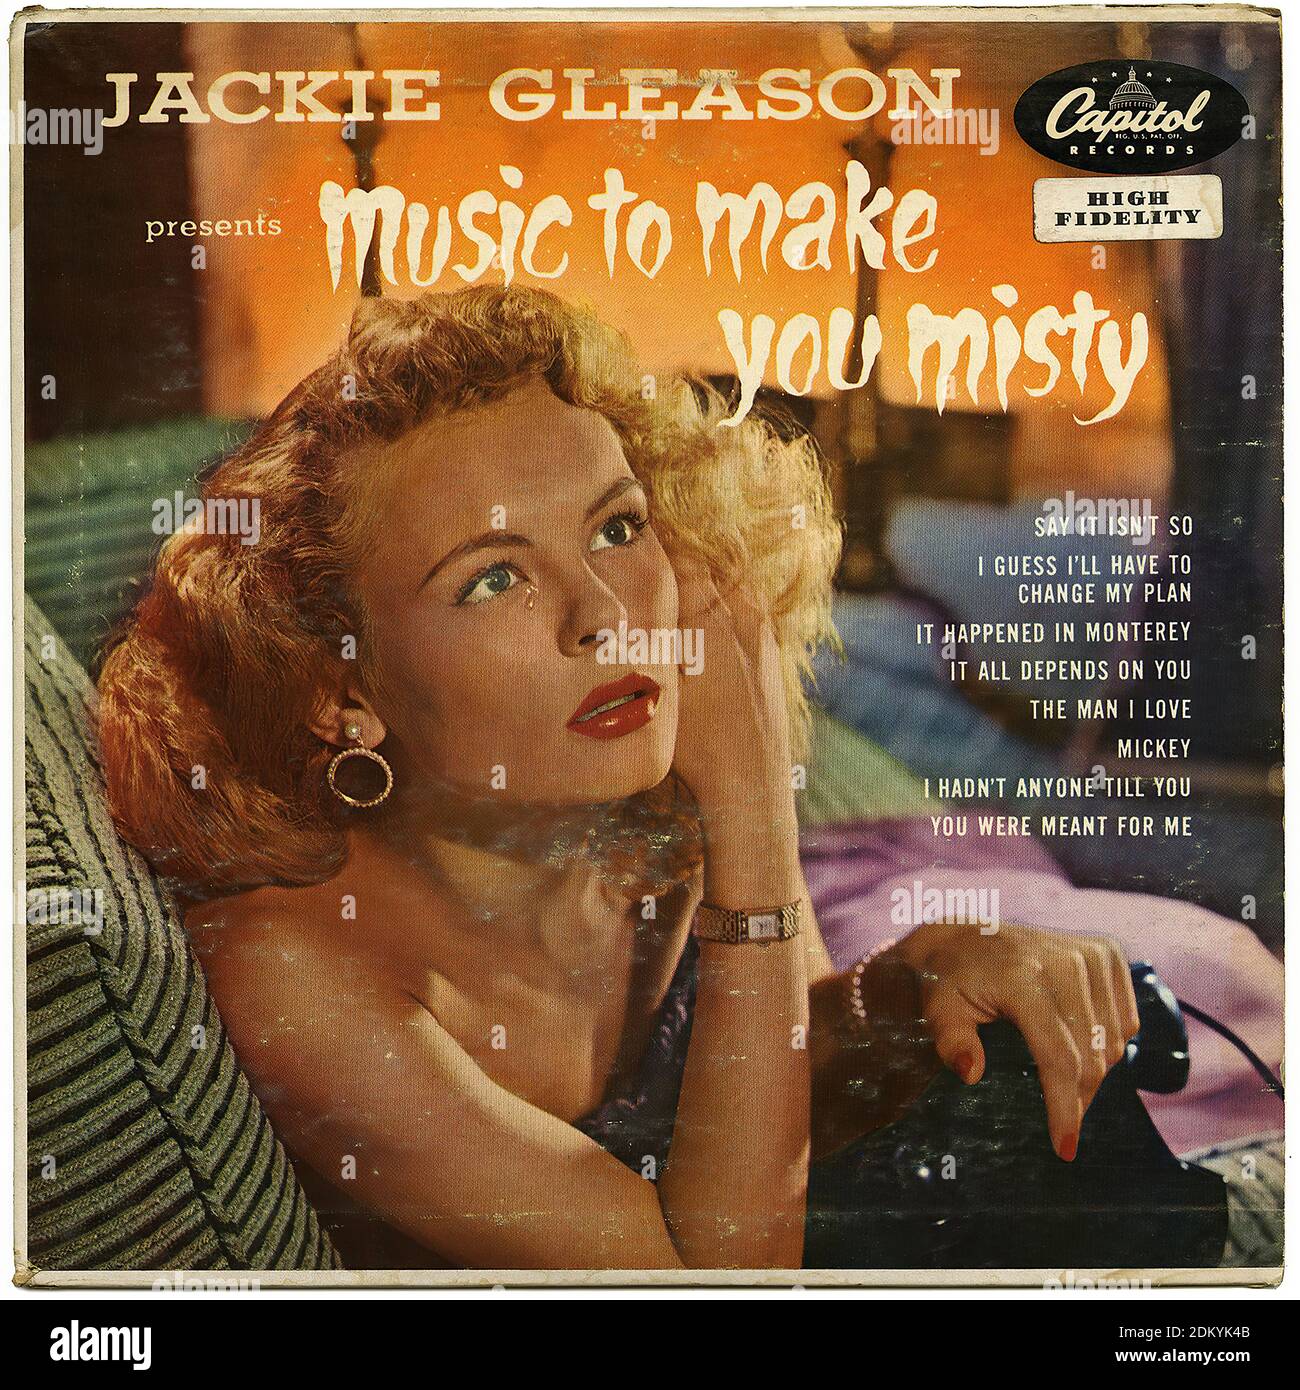 Jackie Gleason Presents Music to Make You Misty - Vintage Record Cover Stock Photo